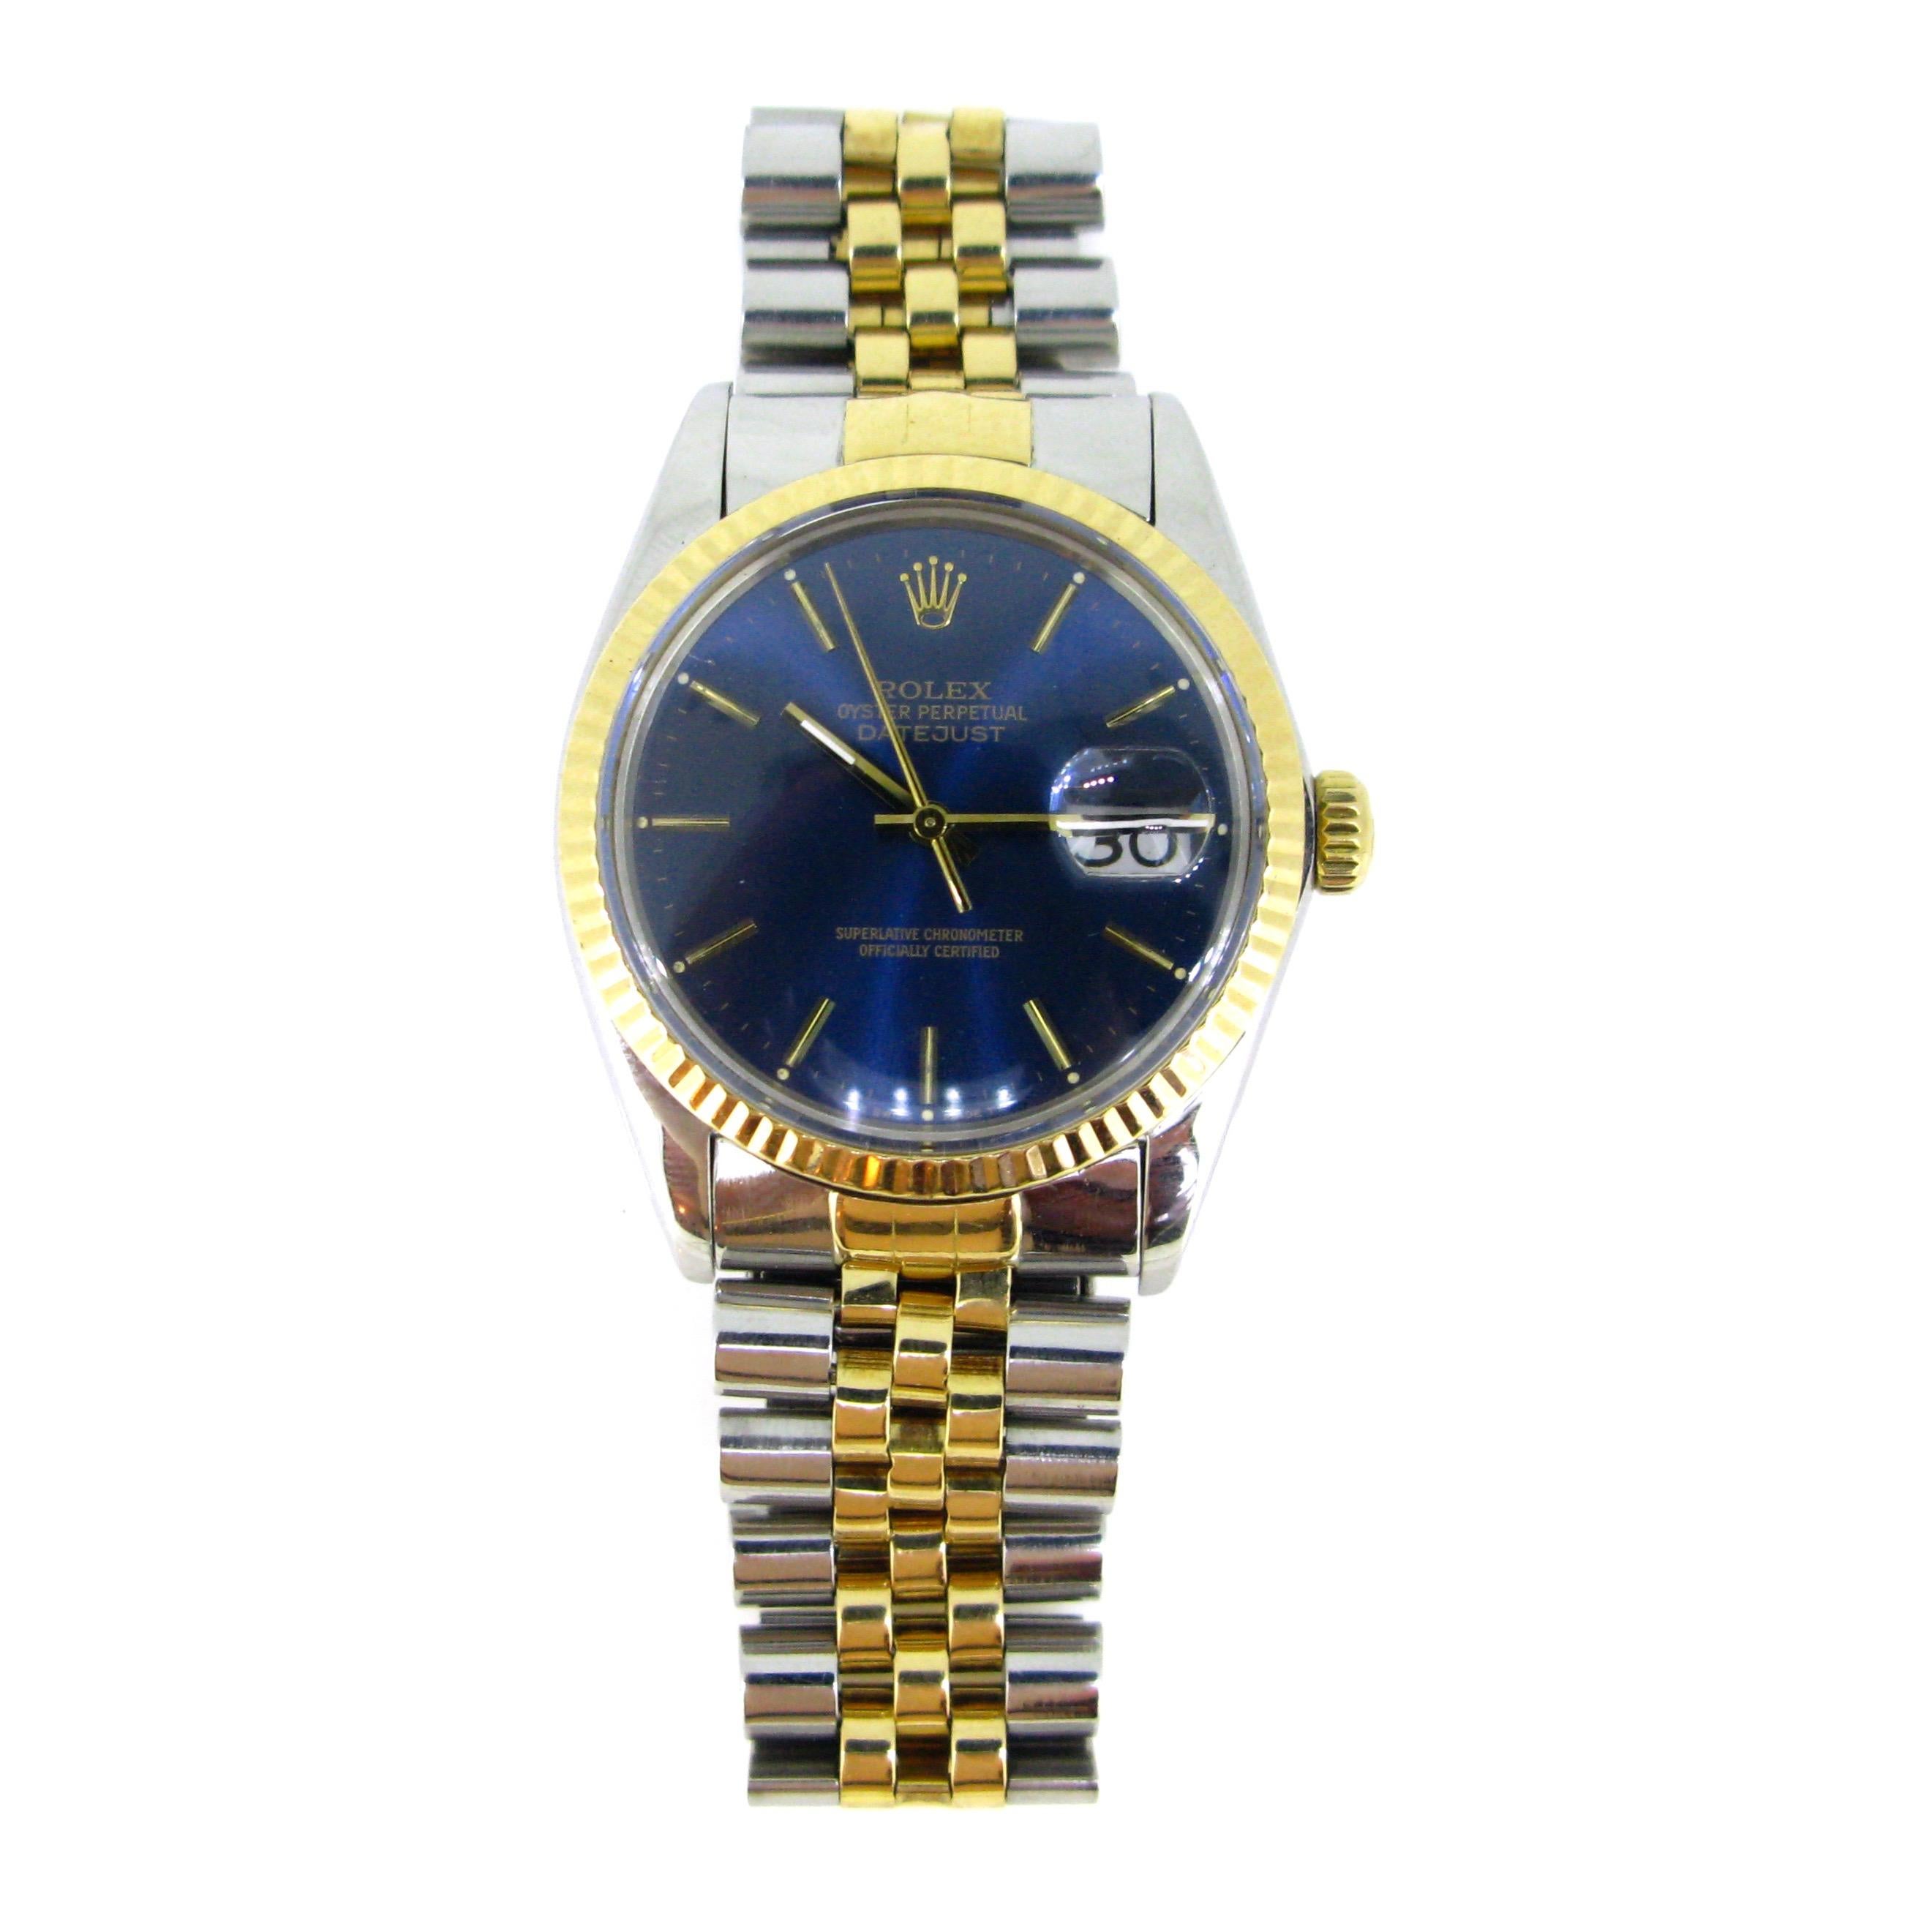 Rolex Oyster Perpetual Datejust 16000 Yellow Gold Stainless Steel Watch